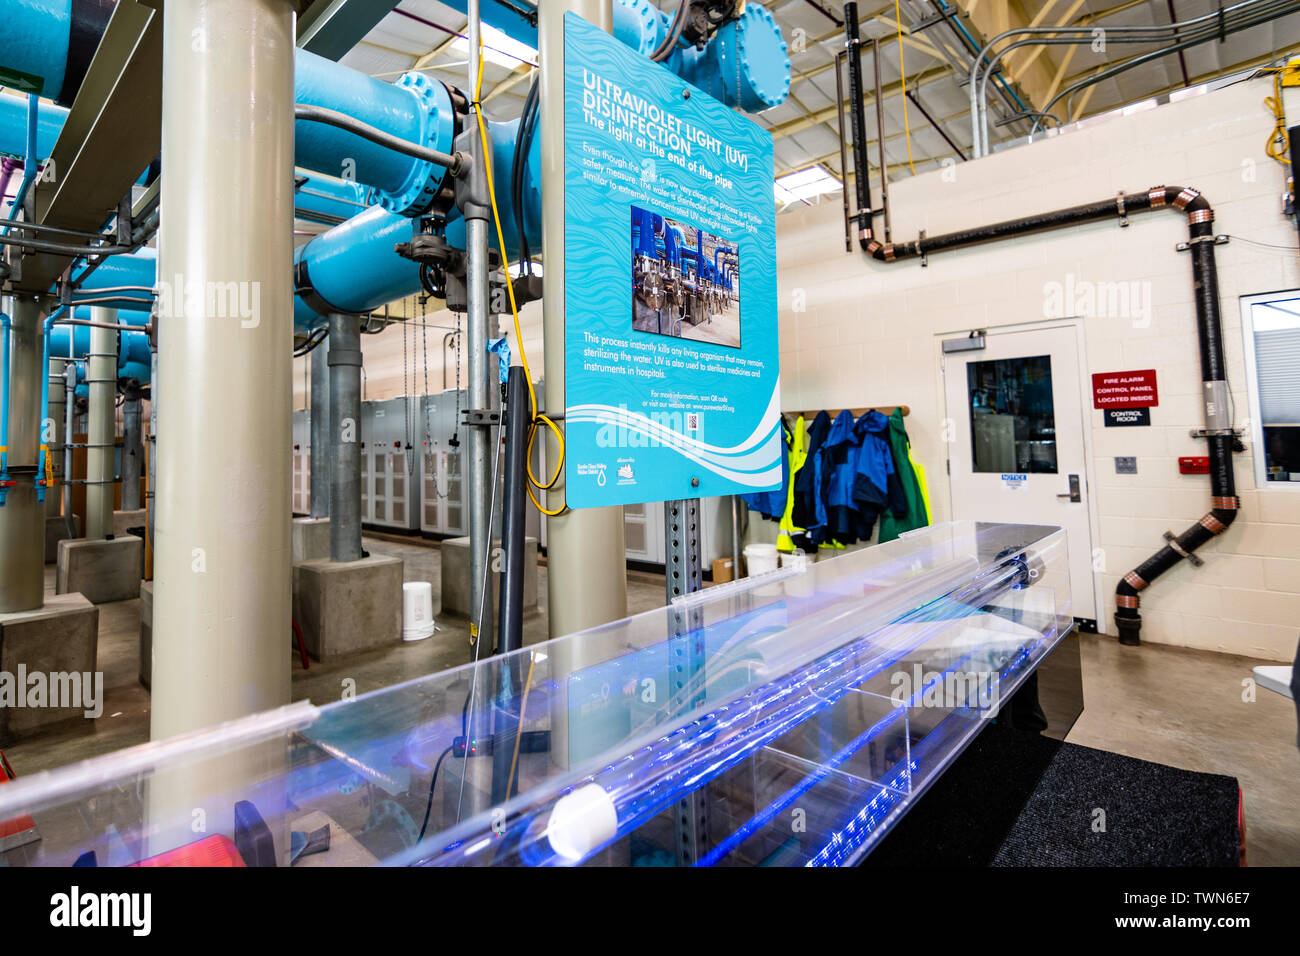 June 20, 2019 San Jose / CA / USA - Ultraviolet light system at Silicon Valley Advanced Water Purification Center located in South San Francisco bay a Stock Photo